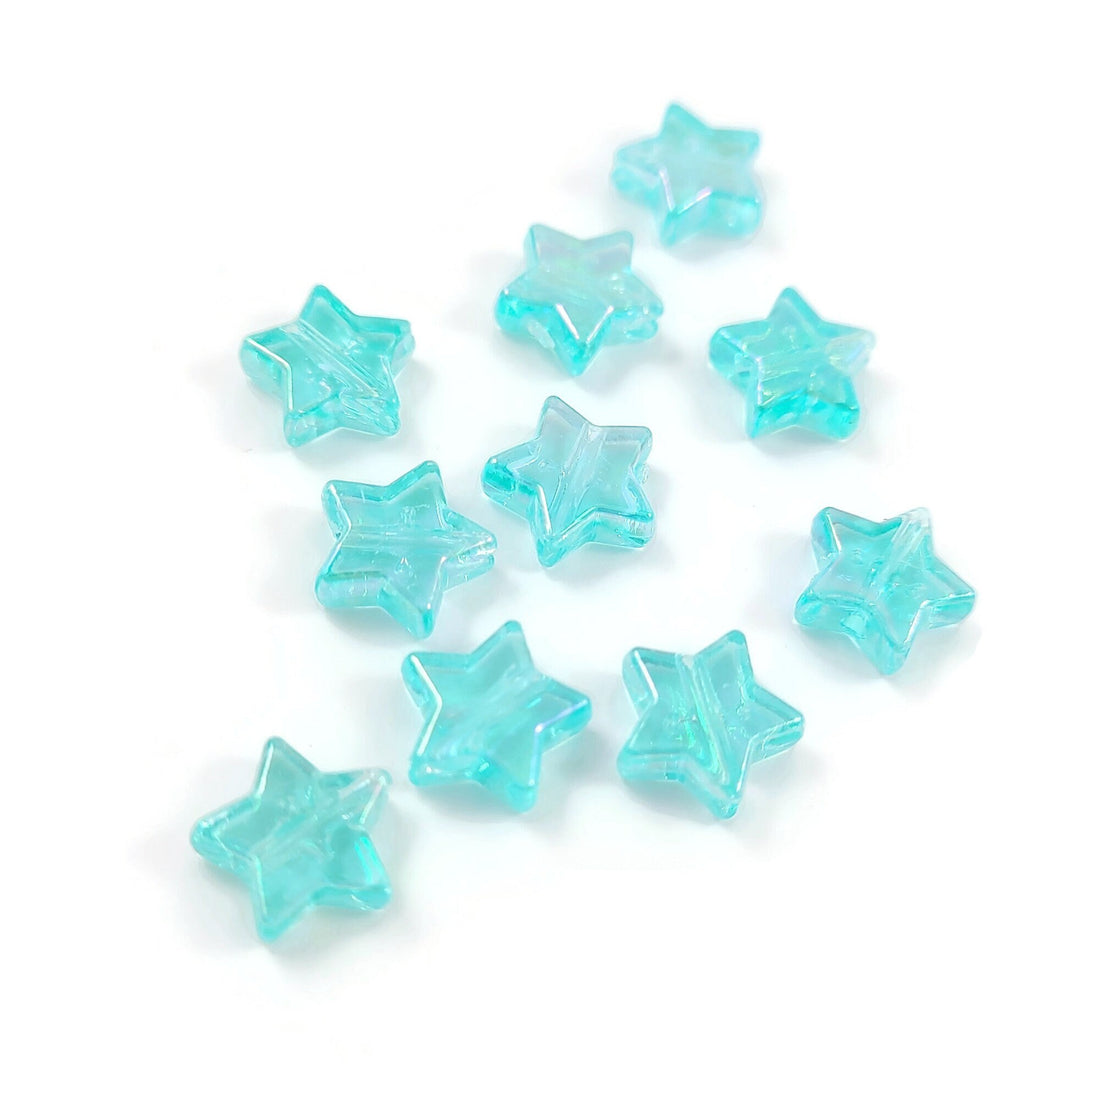 10 transparent pearly heart beads, Aqua turquoise 10mm acrylic beads for jewelry making